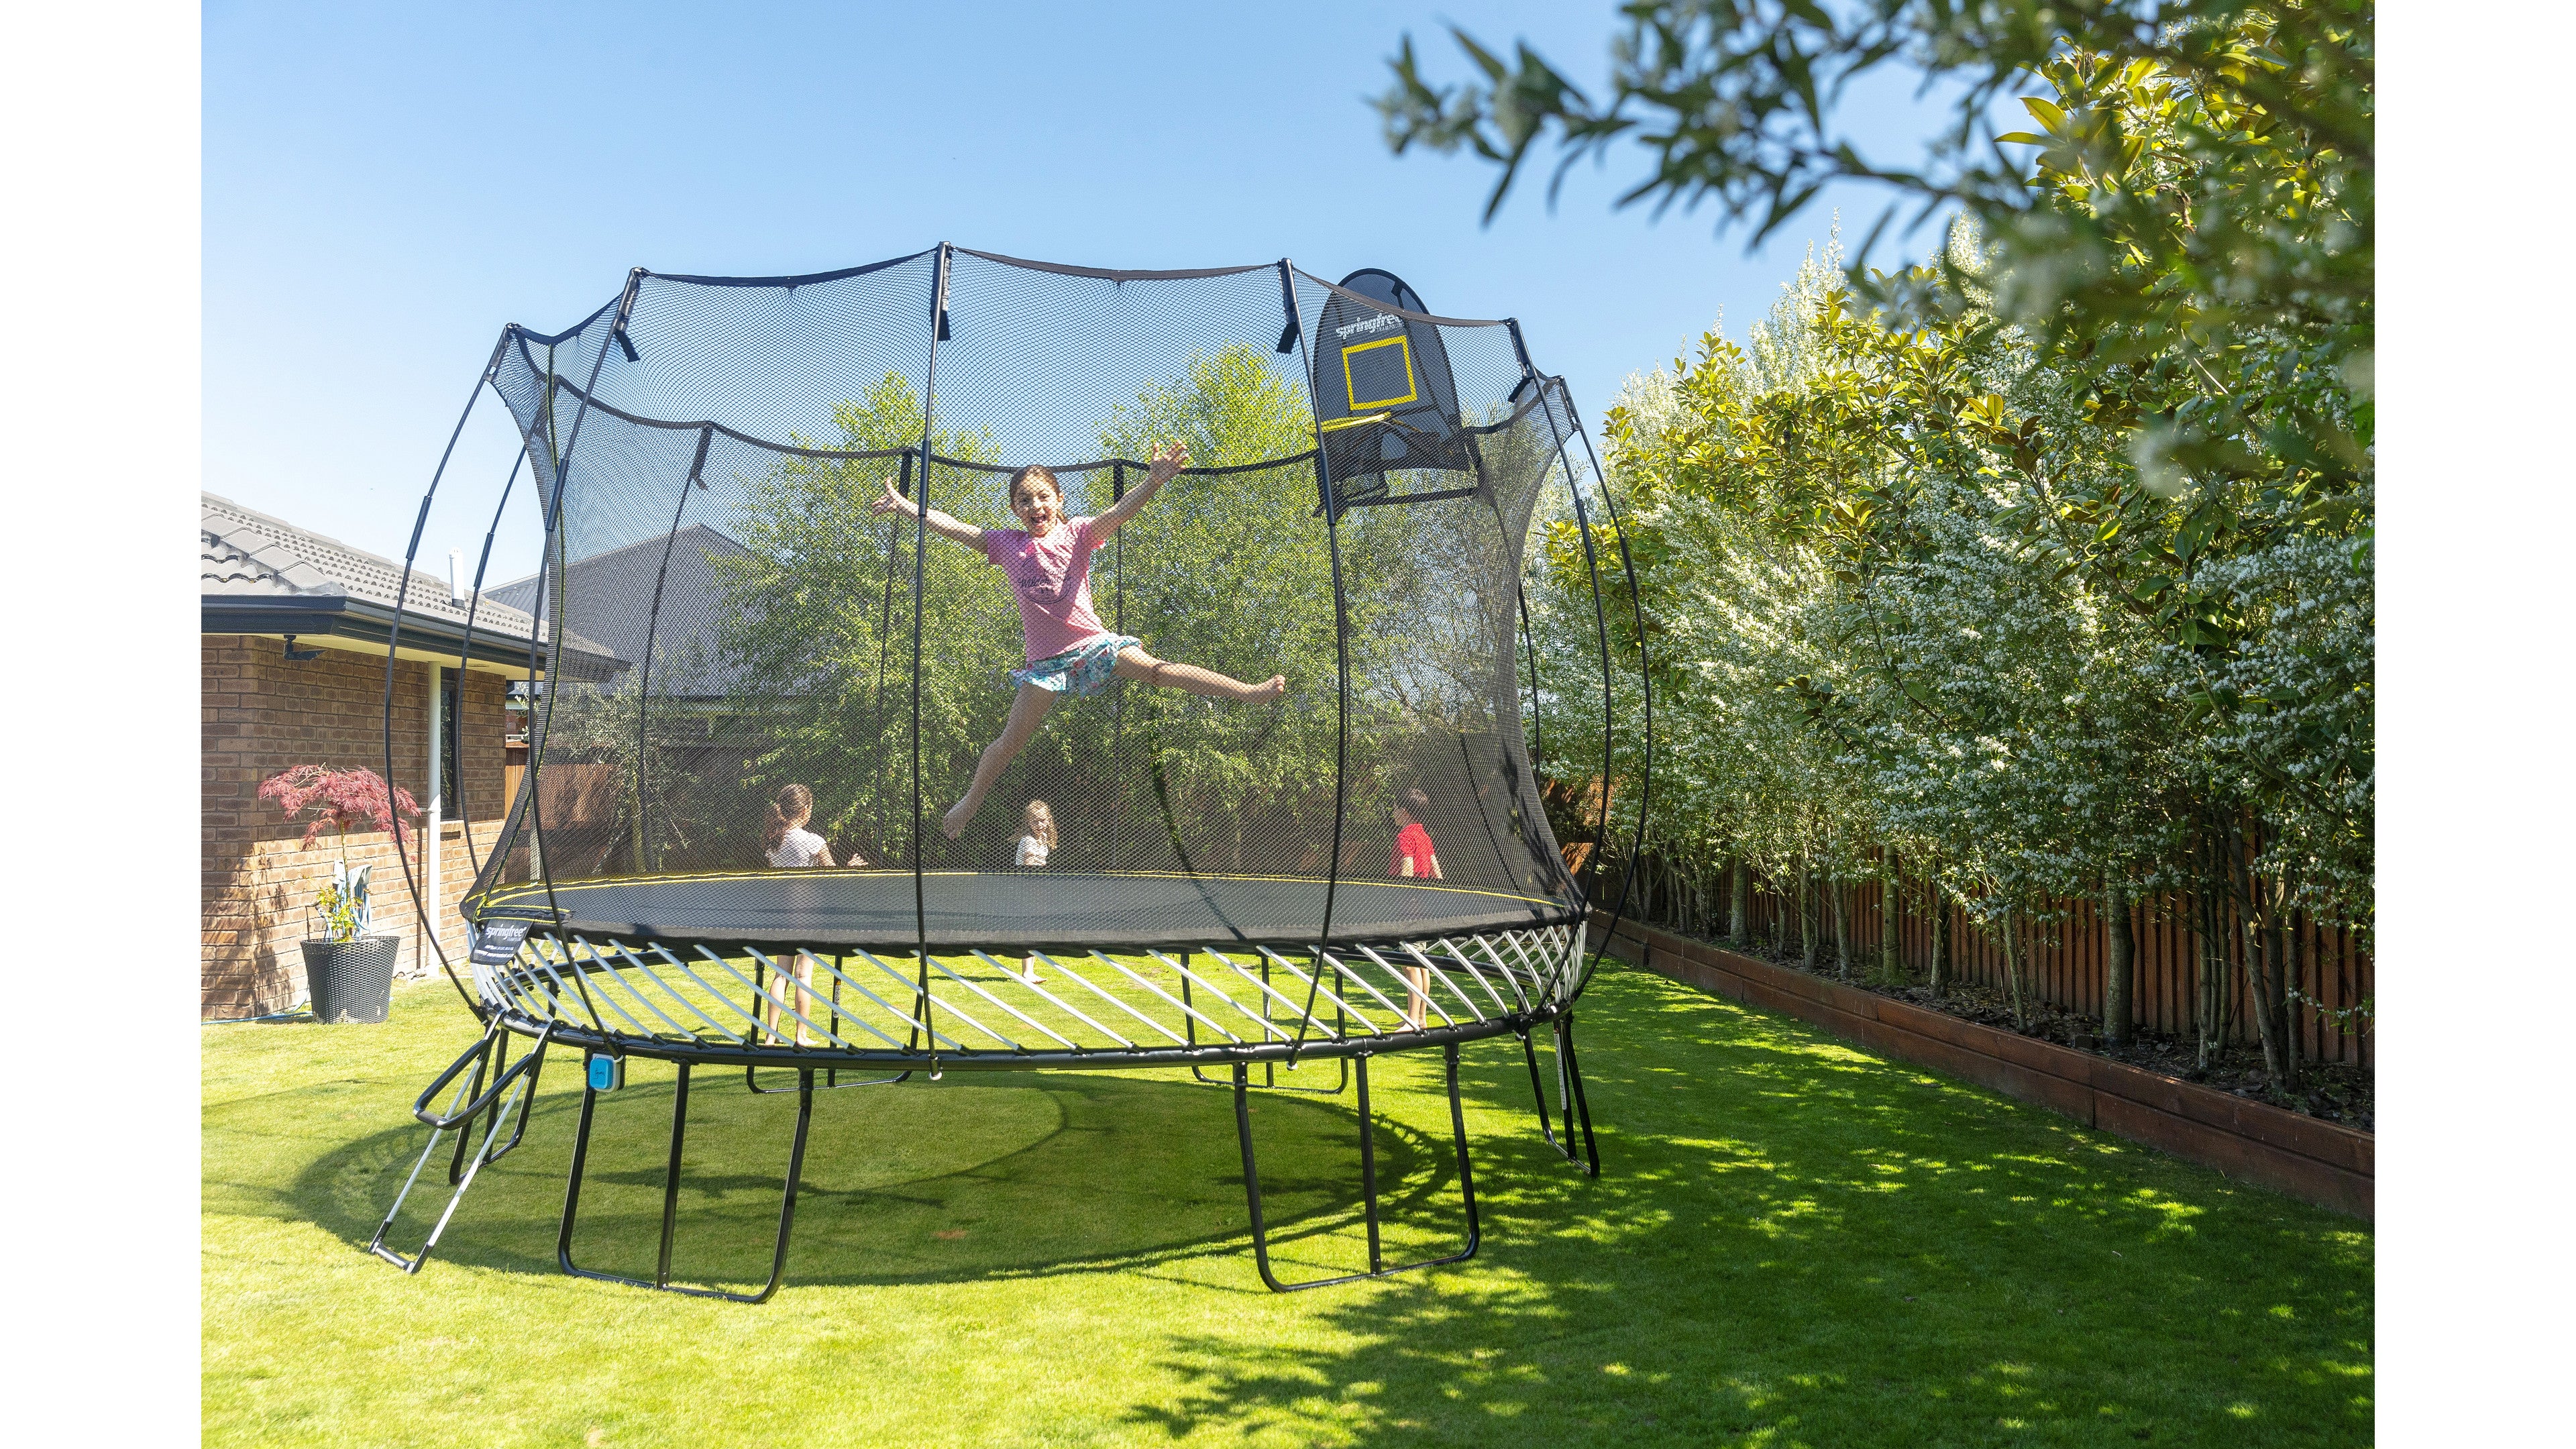 Are Backyard Trampolines Safe? | What You Need to Know